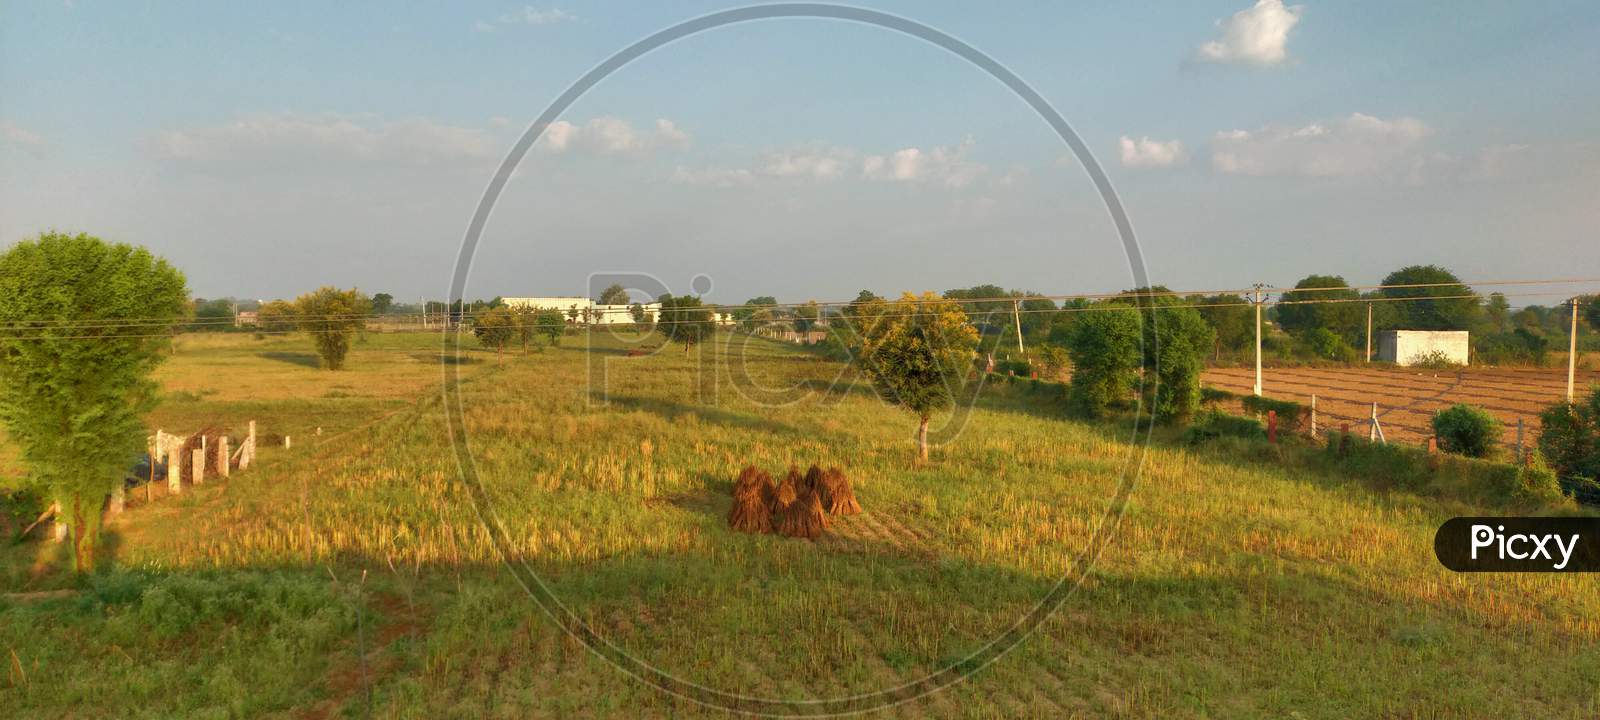 The Green Fields in Rajasthan